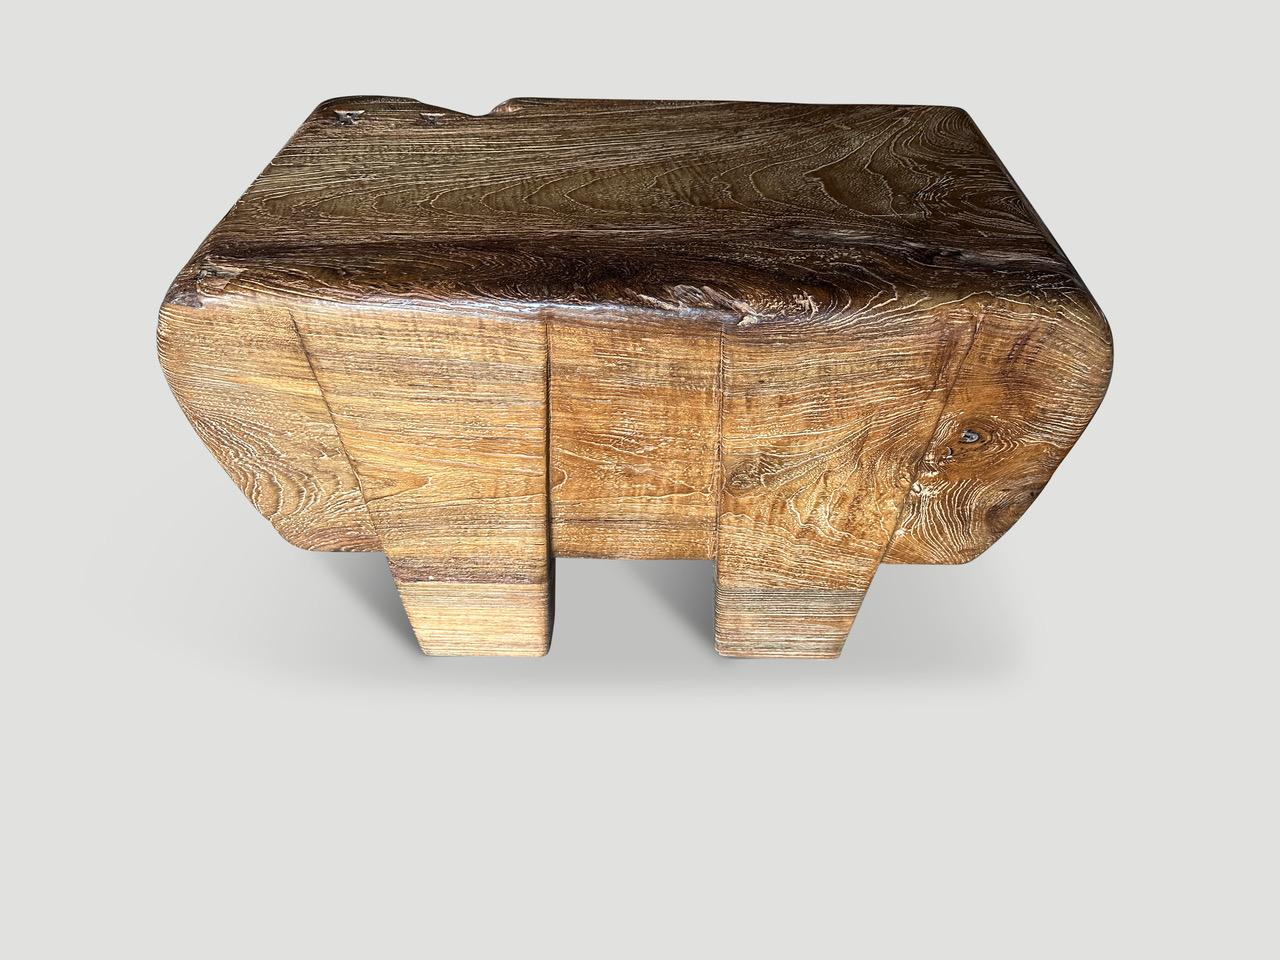 Wood Andrianna Shamaris Minimalist Coffee Table, Side Table Or Bench For Sale